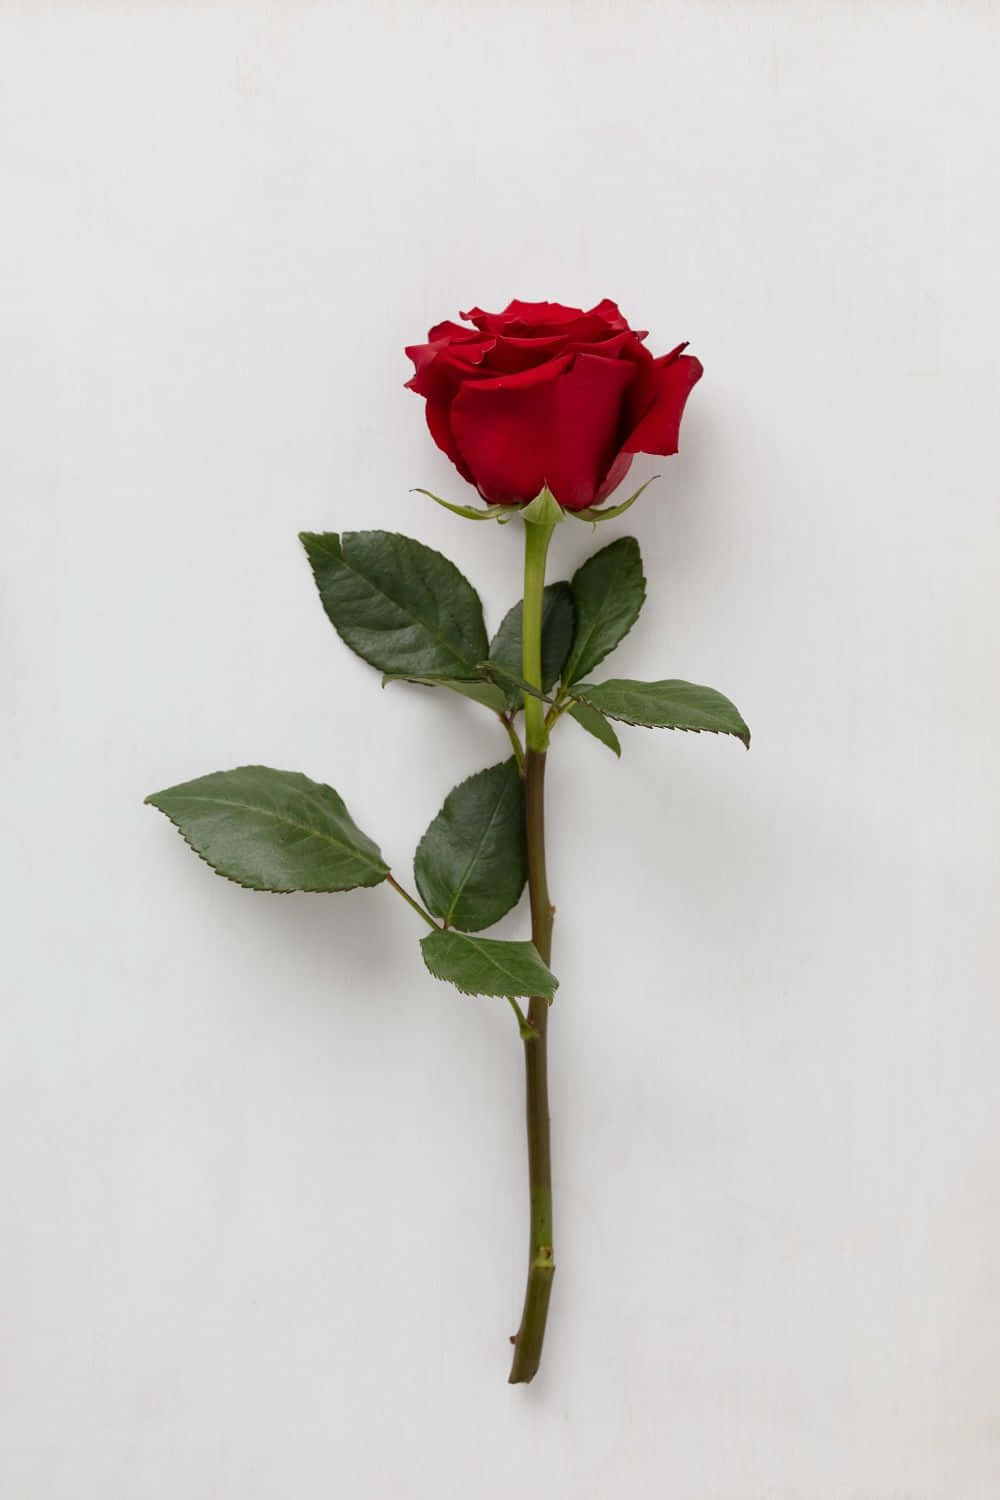 A Single Red Rose in Full Bloom Wallpaper